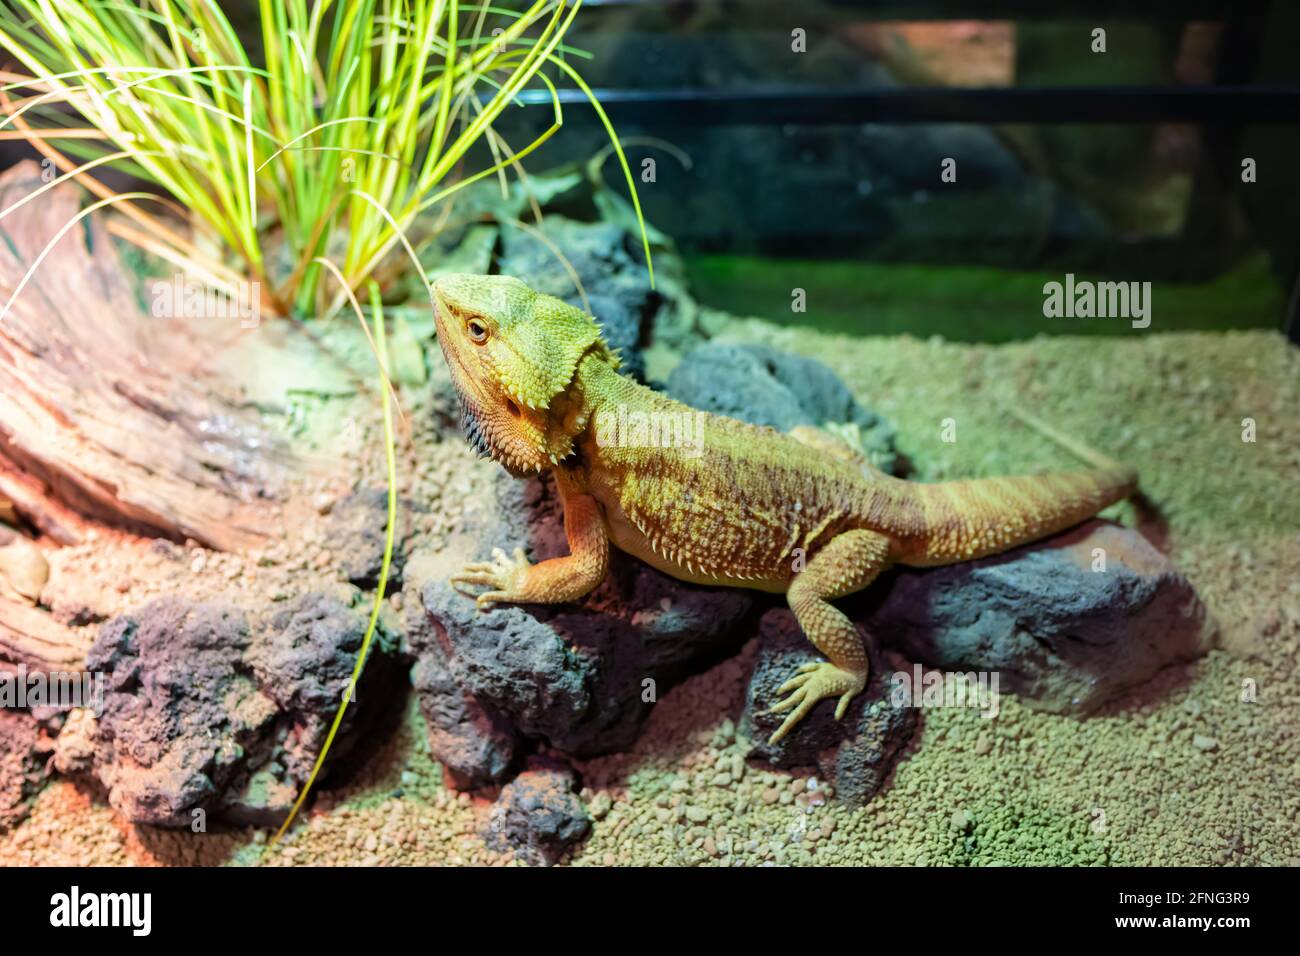 a pet chameleon in a tank Stock Photo